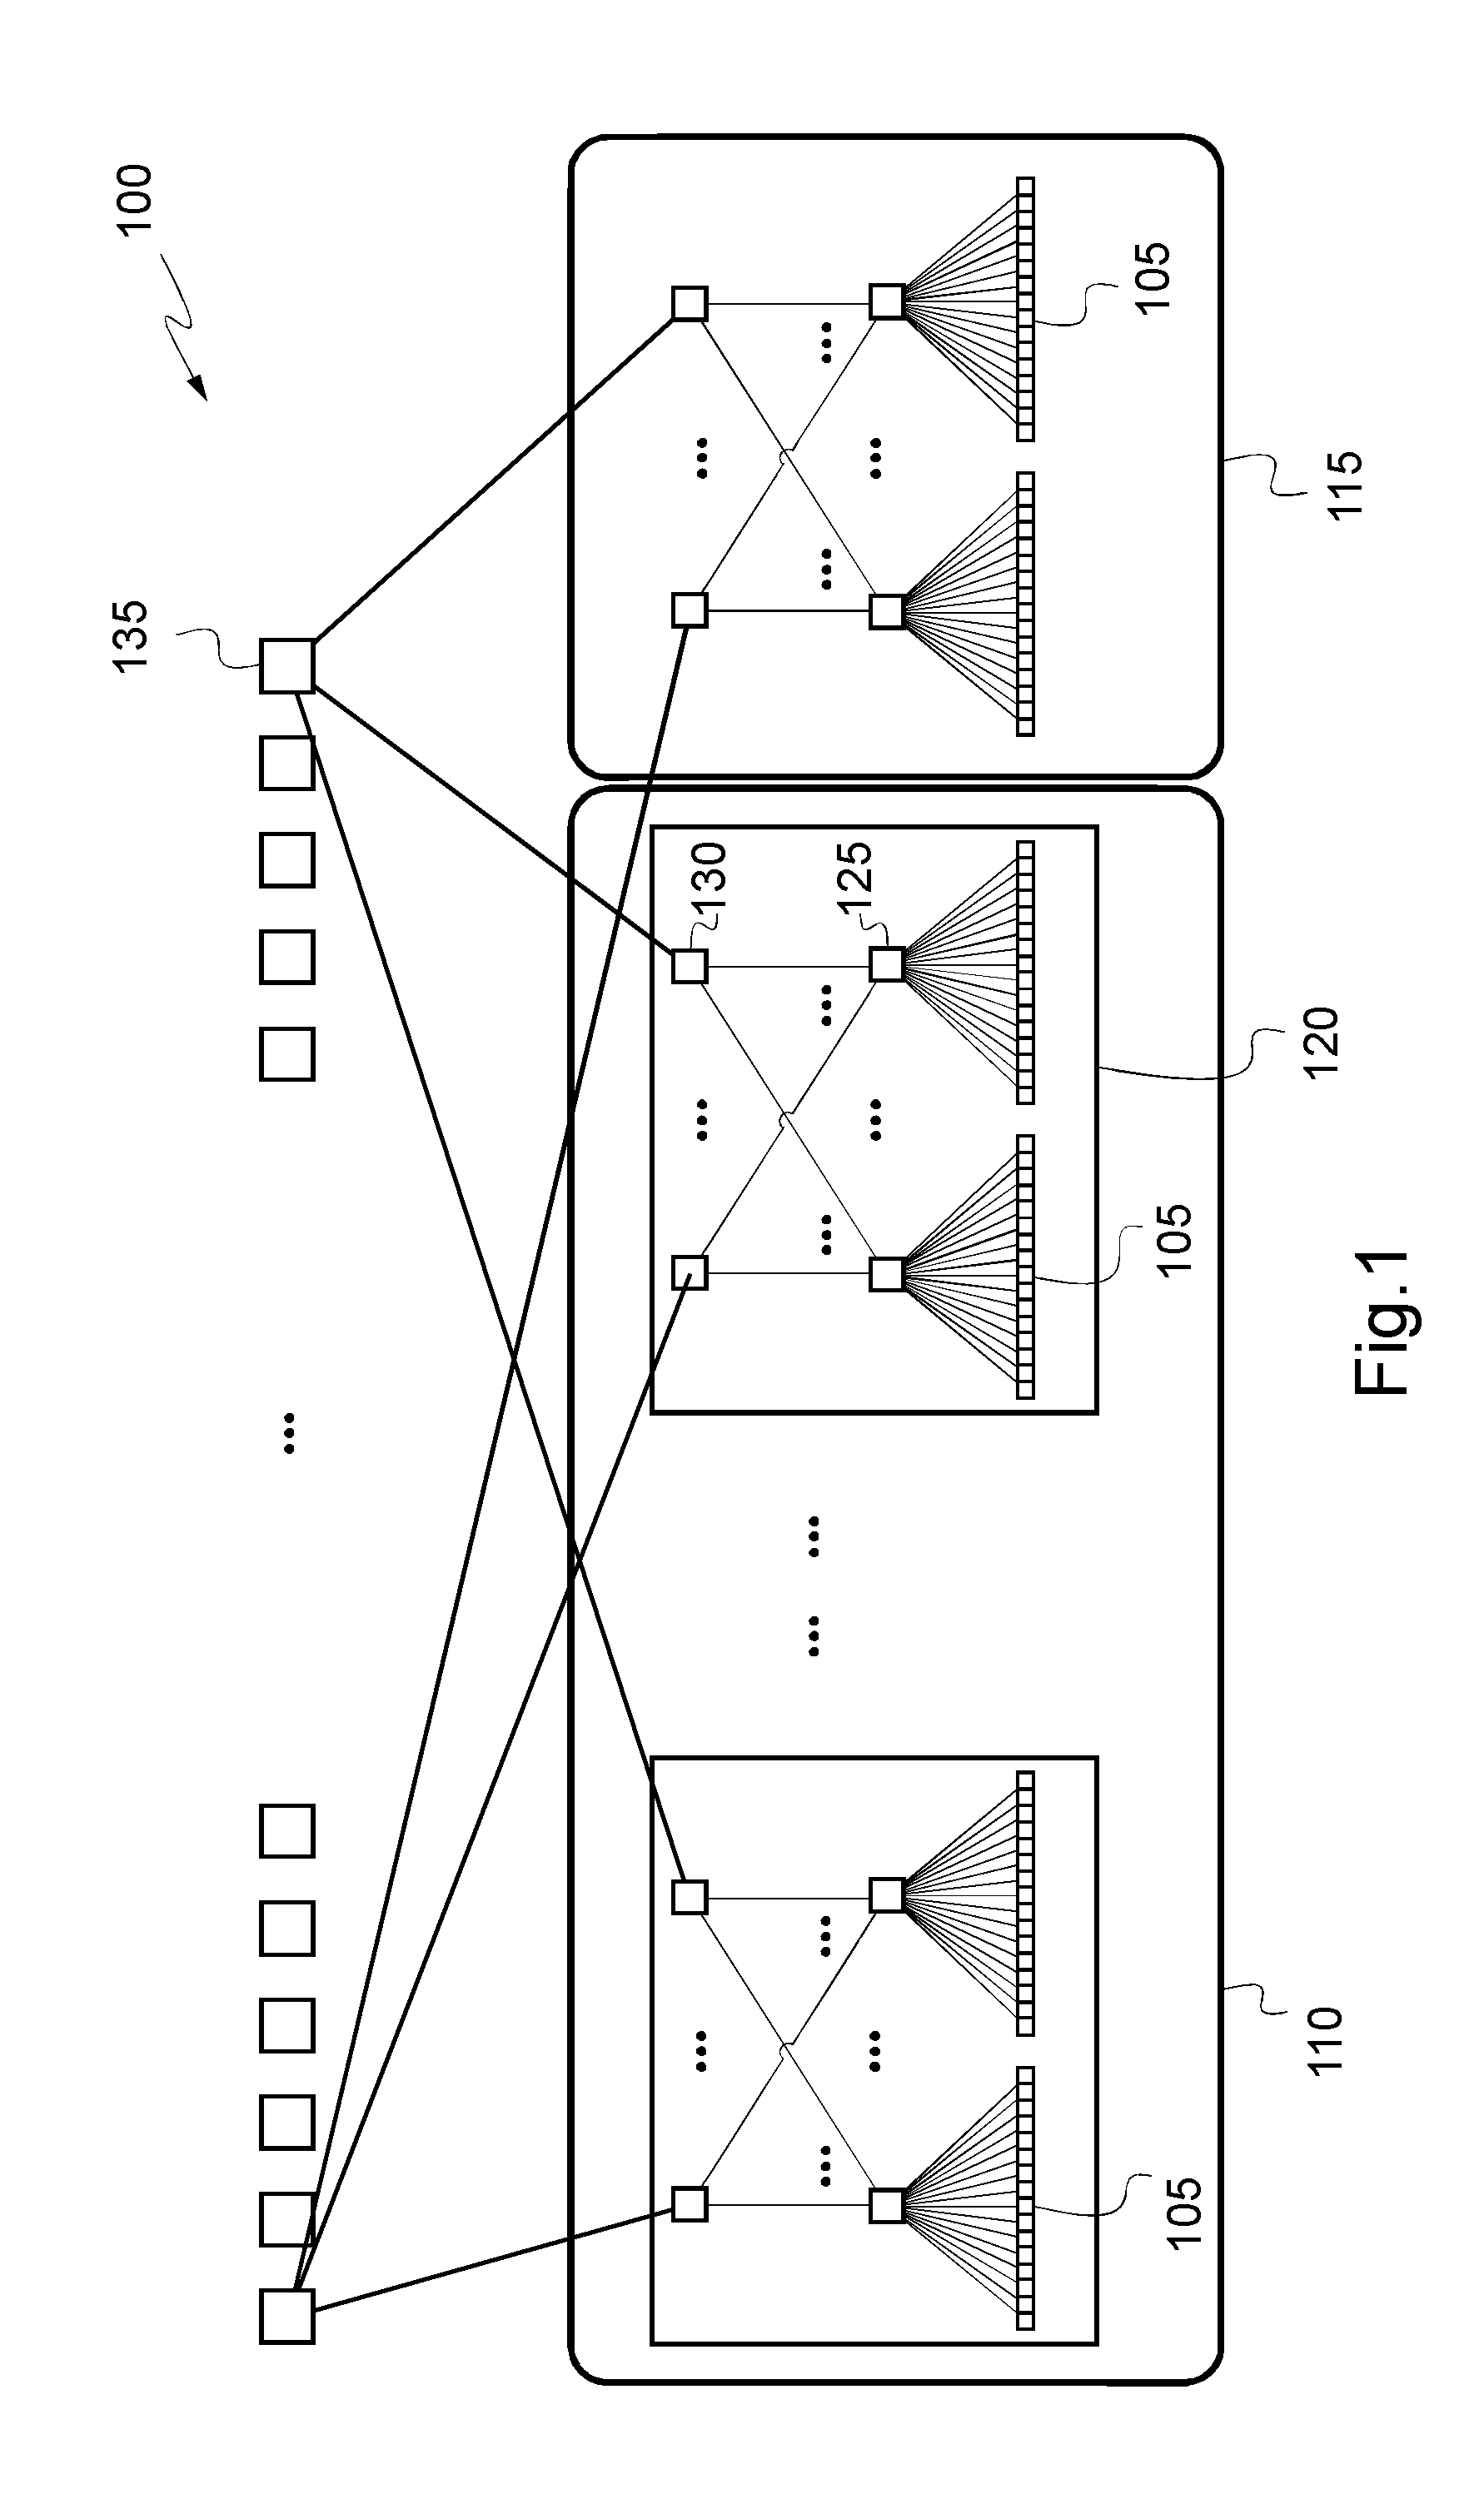 Method and device for processing commands in a set of components of a computer system